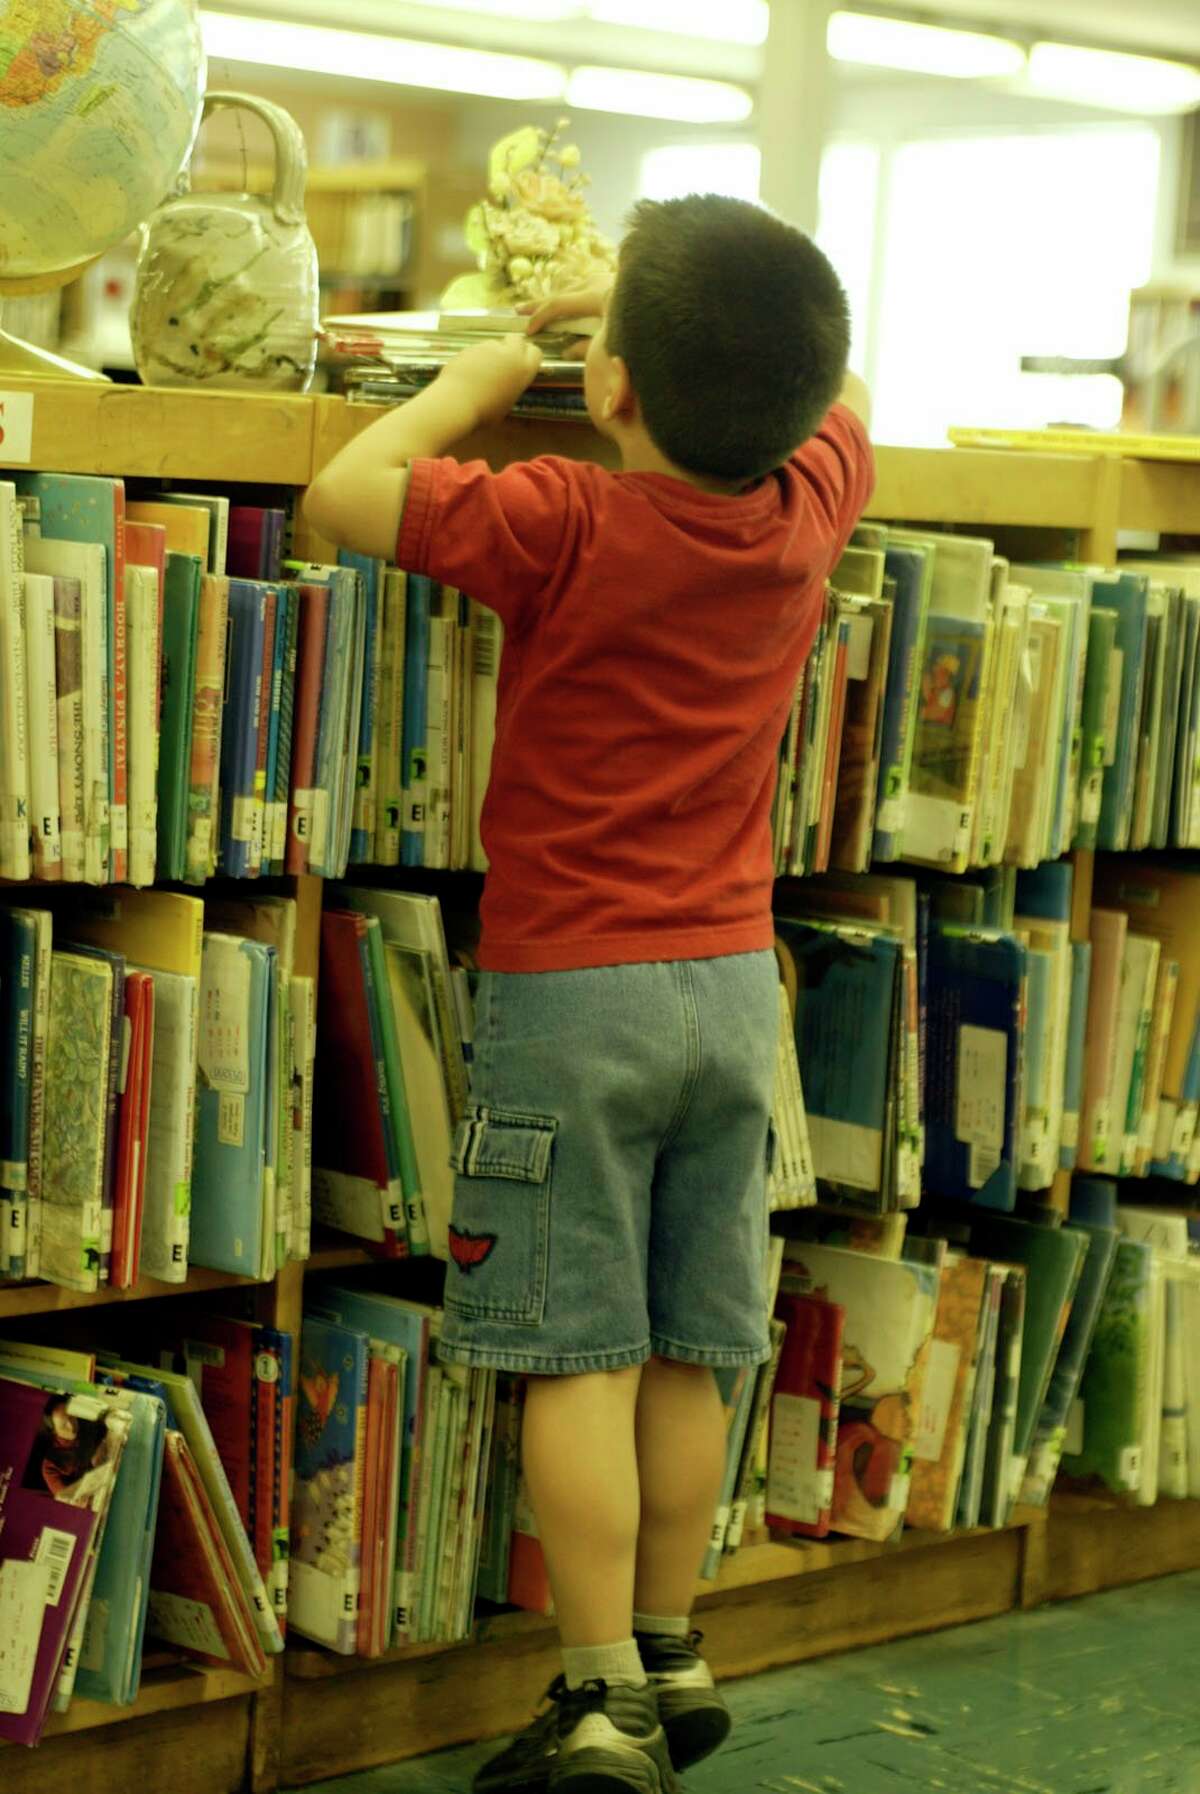 A 4-year-old kid looks at the stack of books he is collecting with his mother and sister. (Photo by Annie Wells/Los Angeles Times via Getty Images)